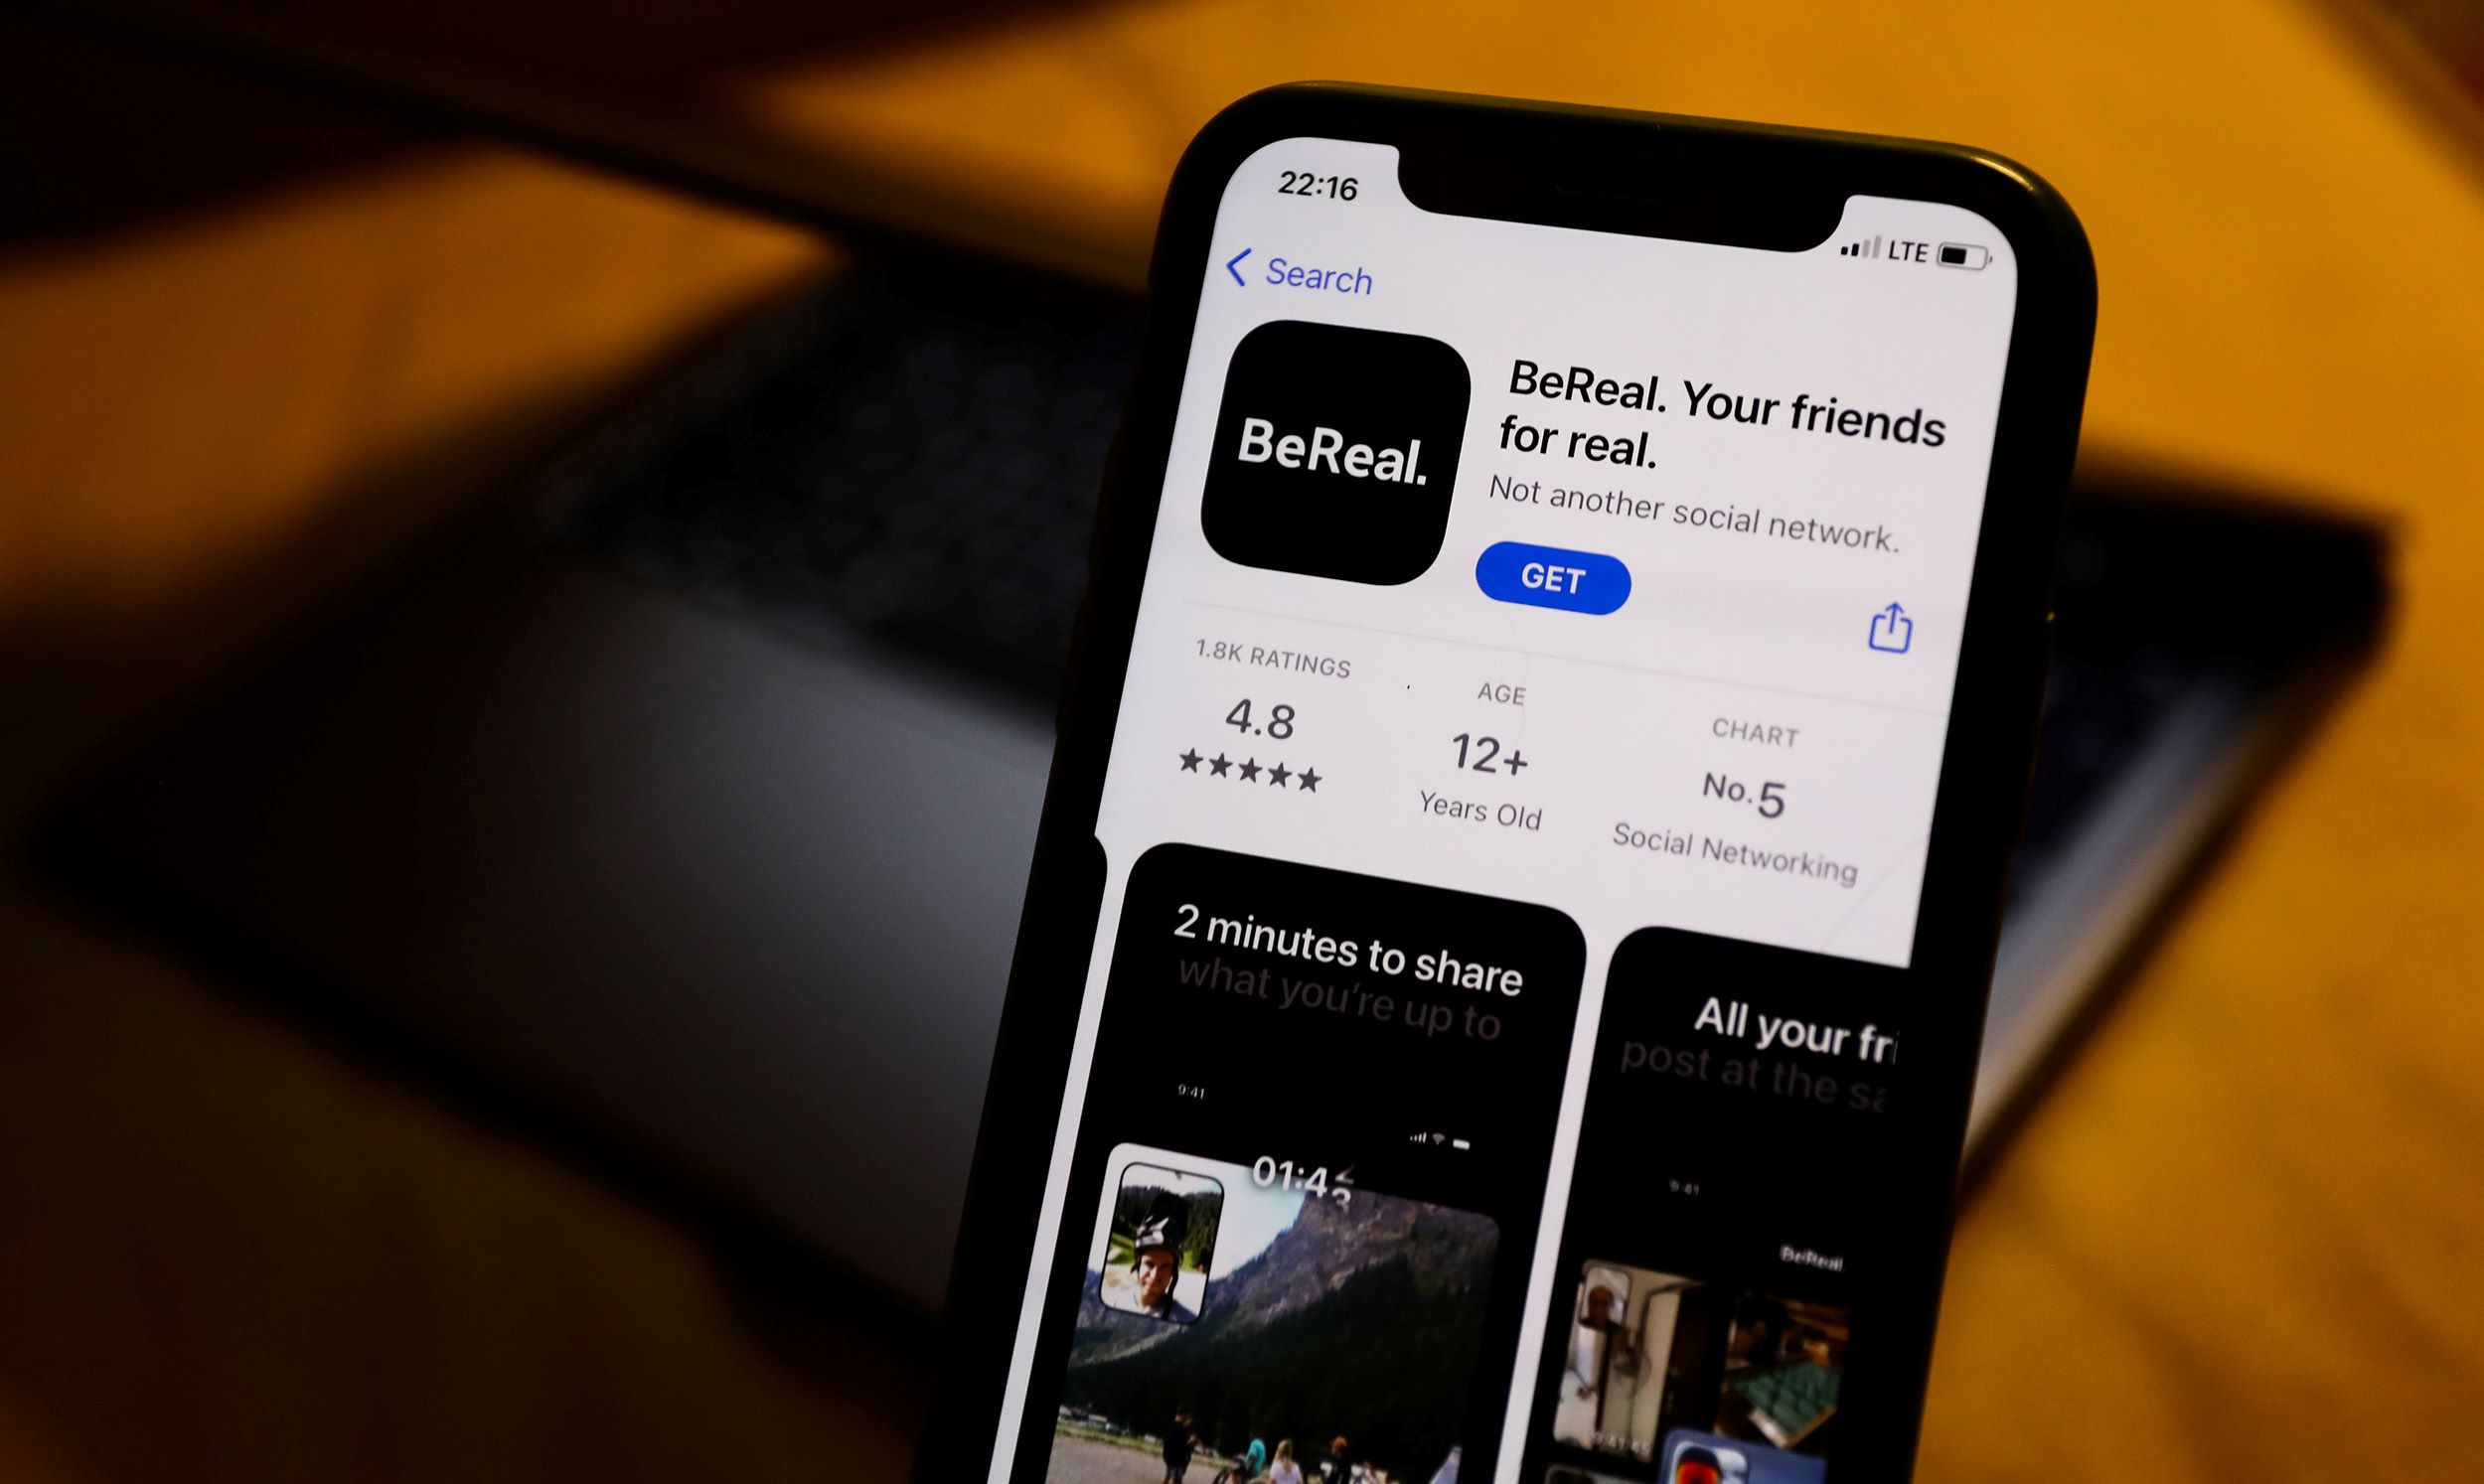 bereal-pushes-back-at-report-claims-25-million-daily-users